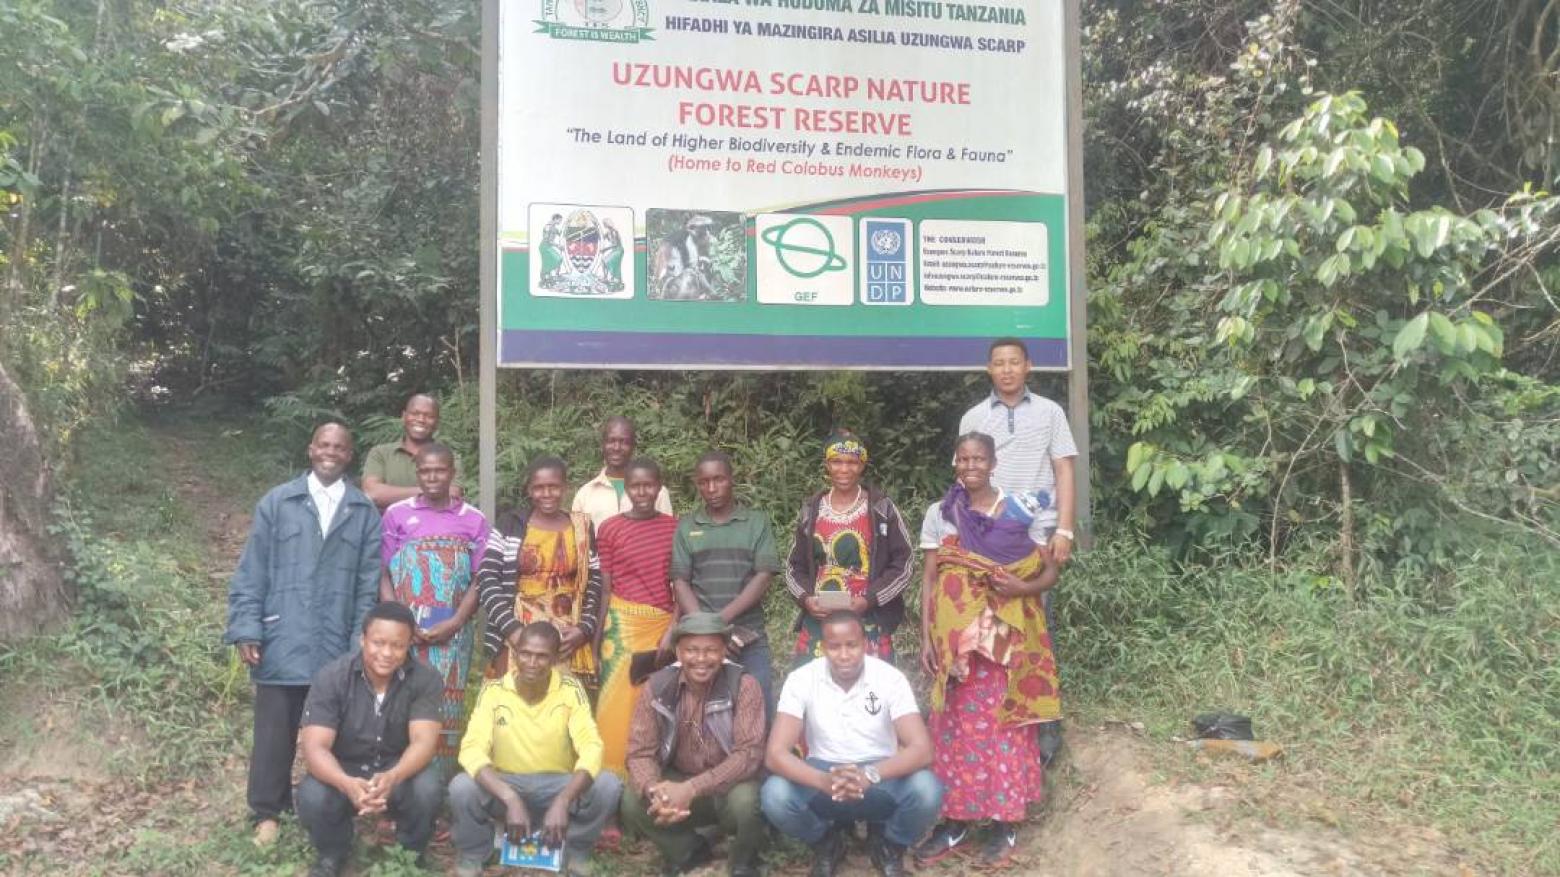 Enhancing effective management and protection of the Uzungwa Scarp Nature Forest Reserve, a threatened tropical biodiversity hotspot in Tanzania